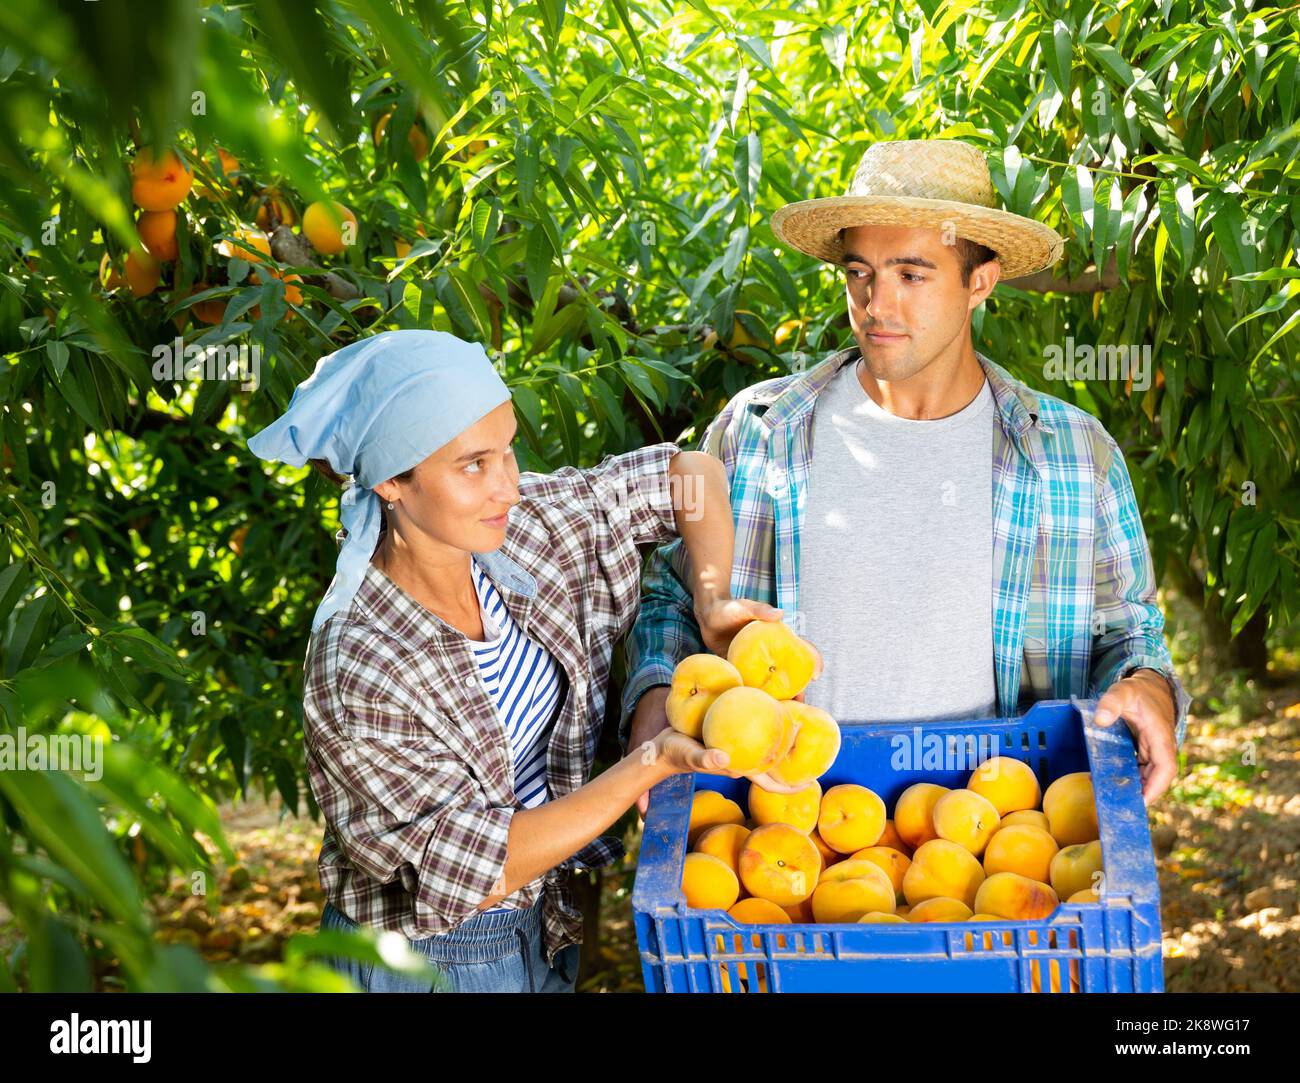 Woman farmer with male partner harvesting ripe peaches in fruit garden, putting in boxes Stock Photo